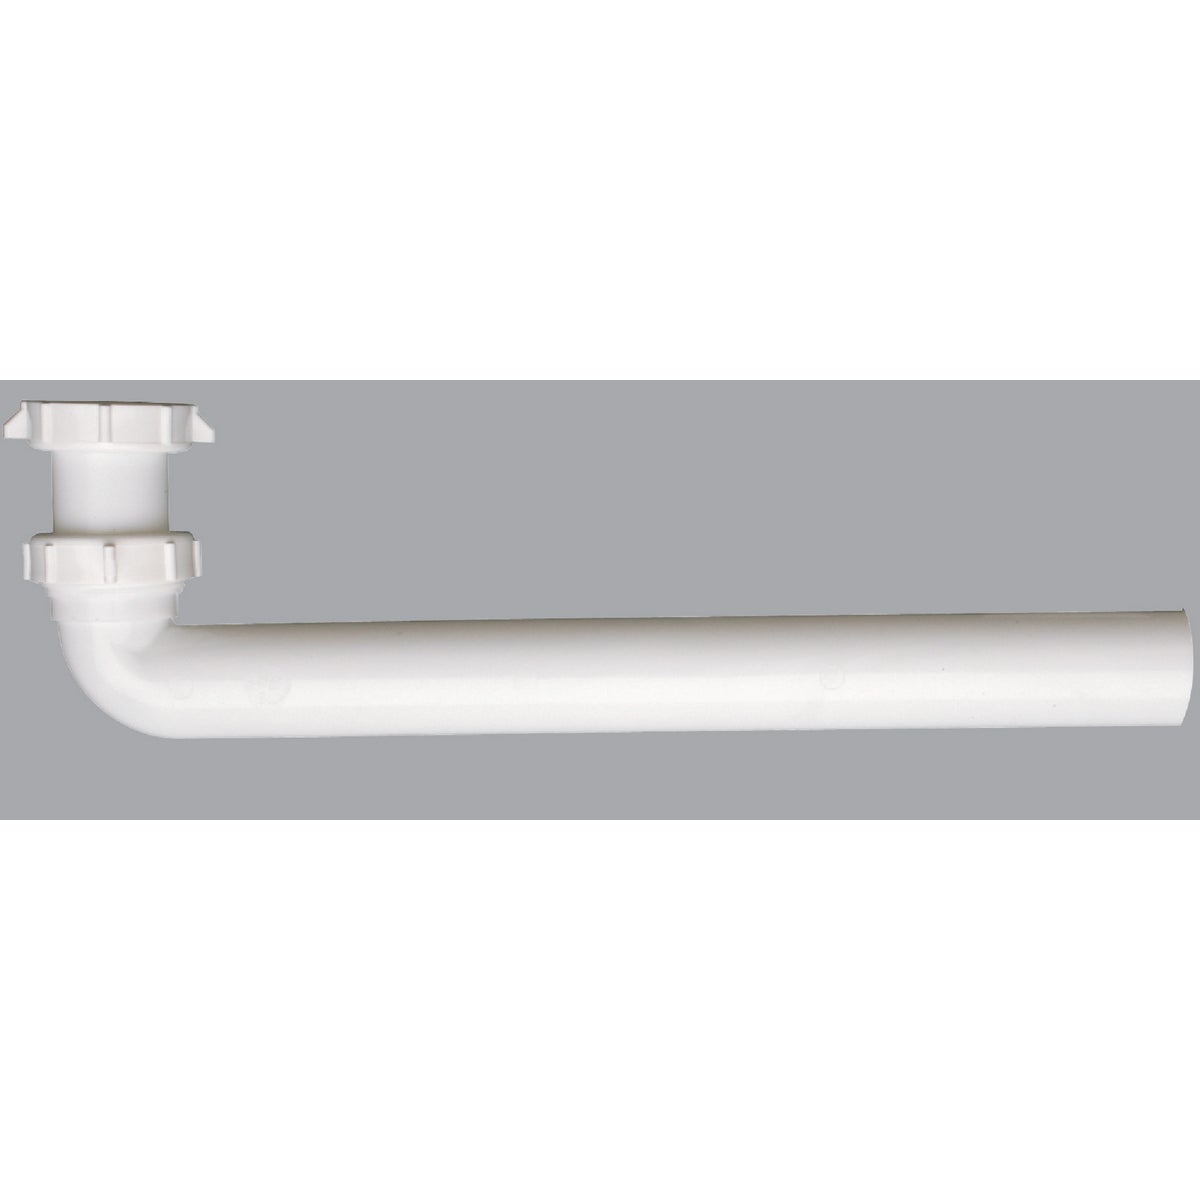 Item 494879, Waste arm 1-1/2" x 15" slip-joint or direct connect plastic